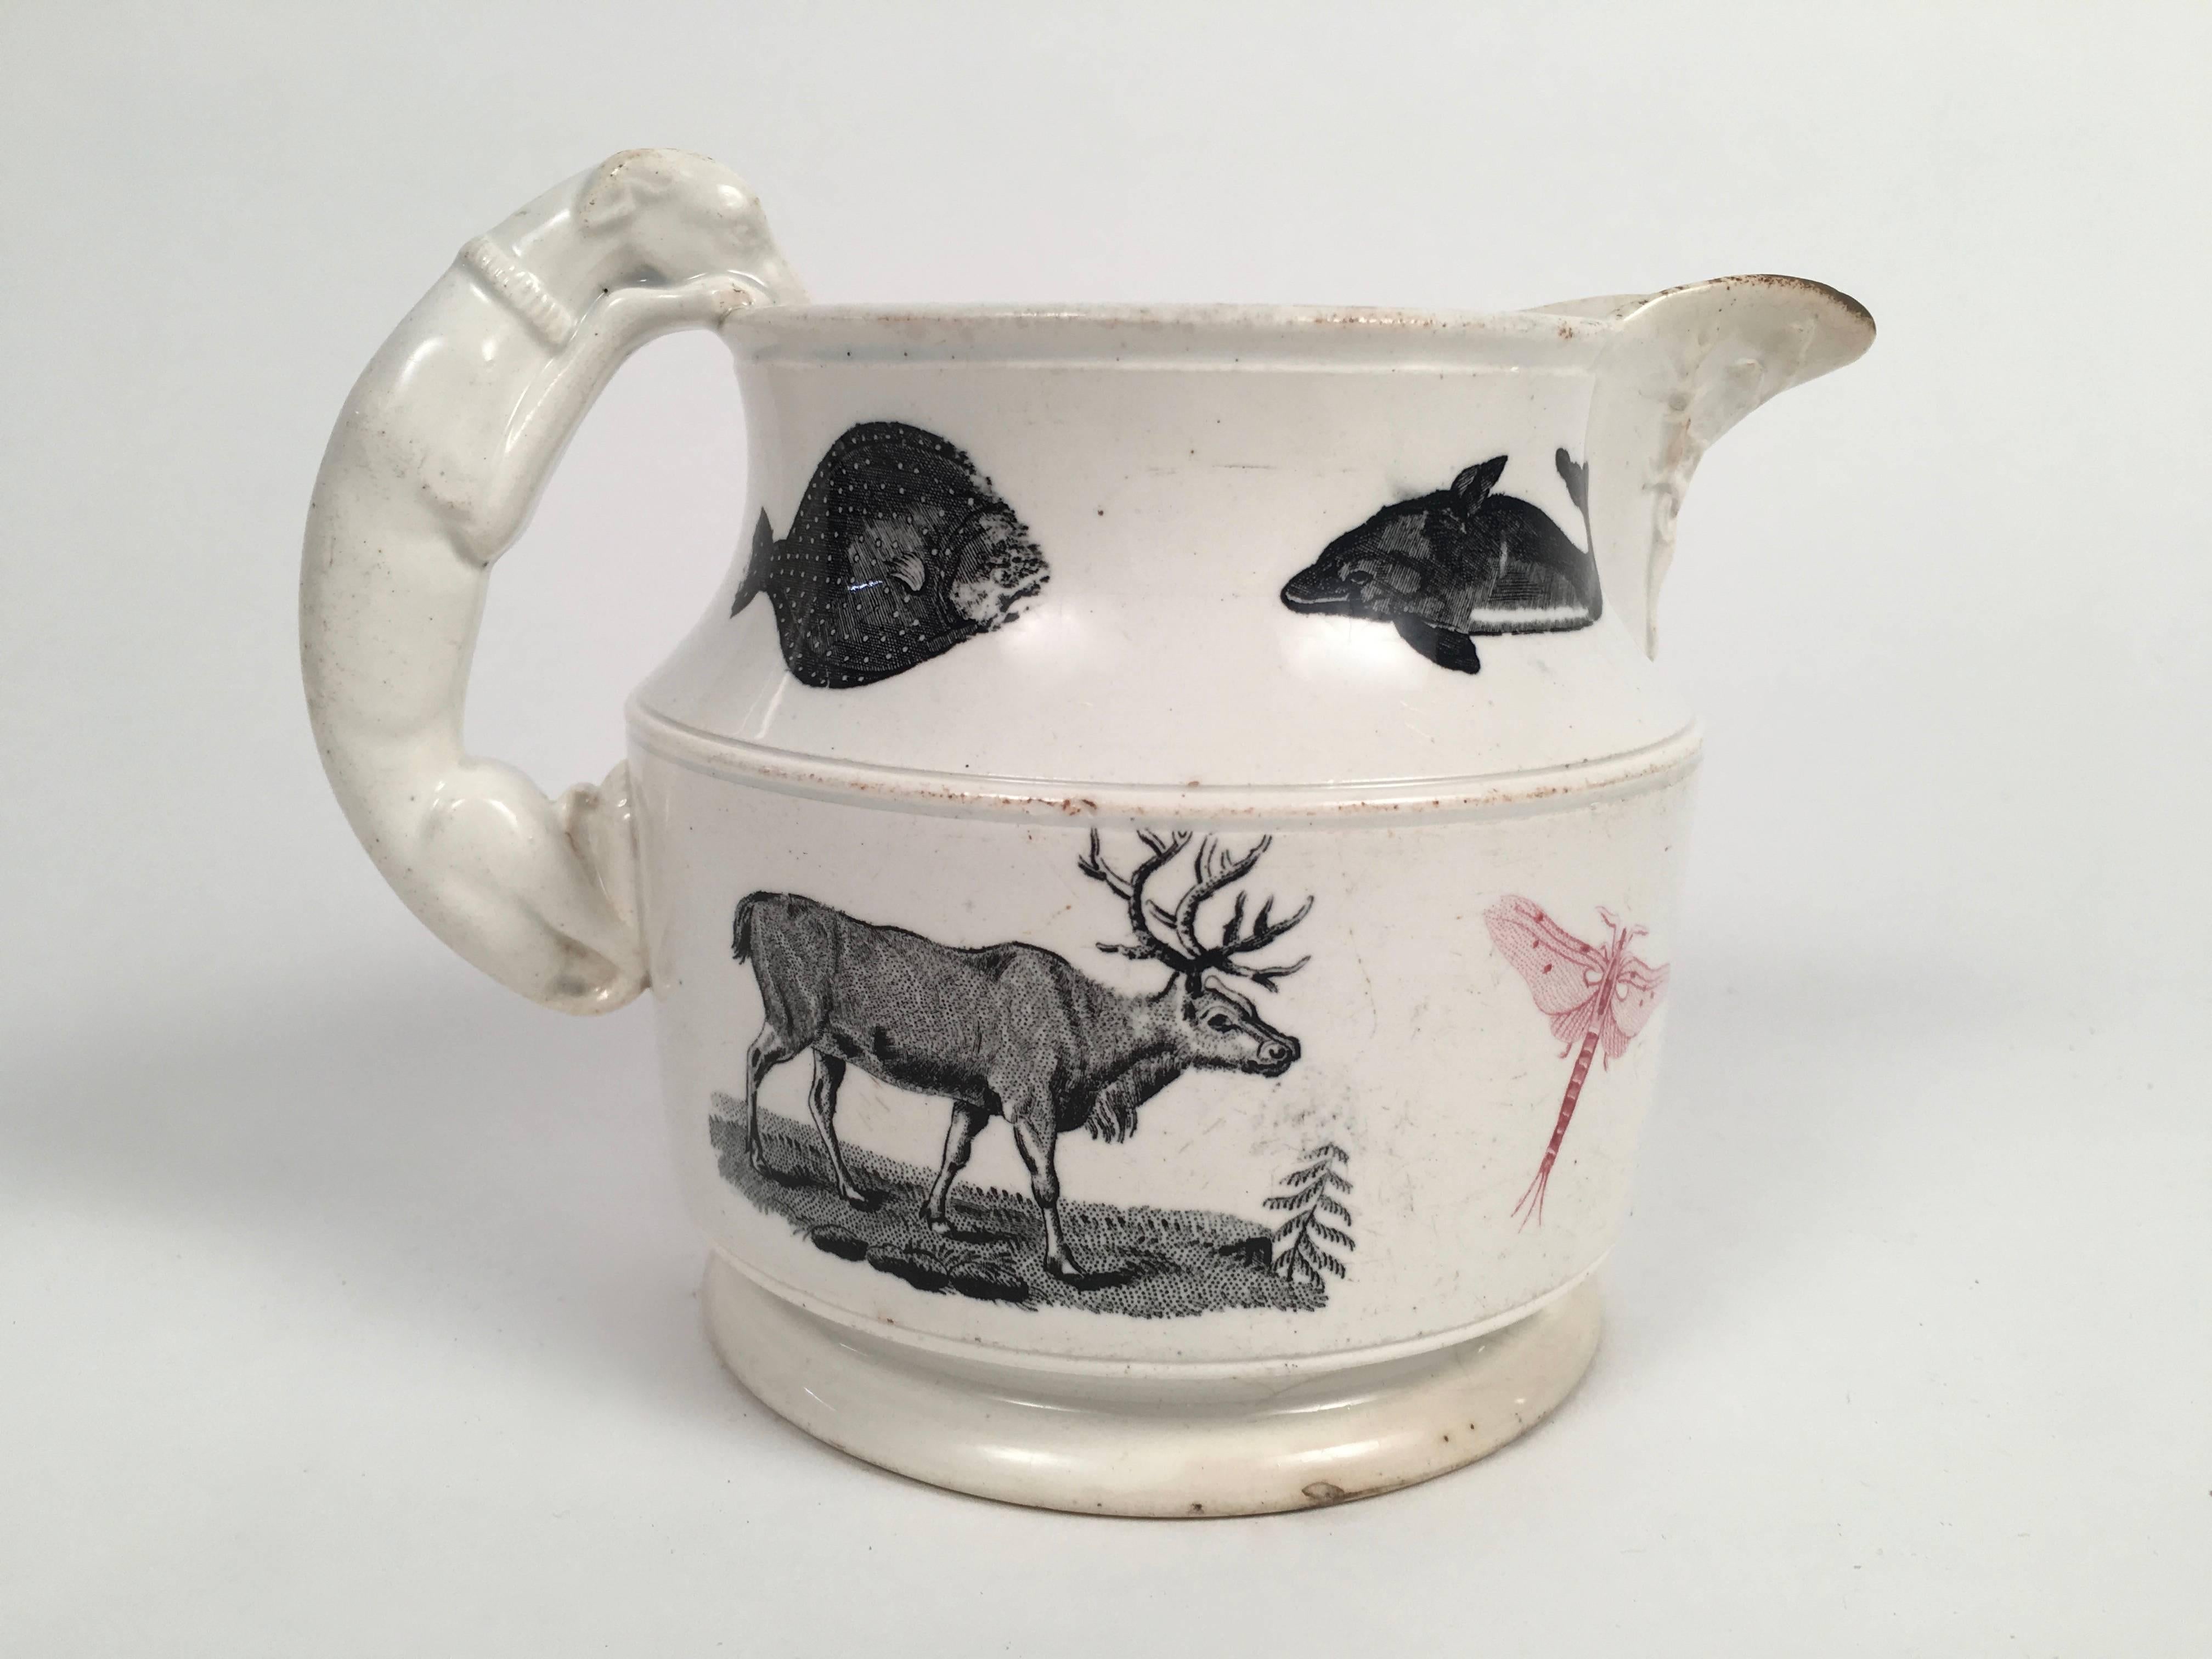 An unusual and charming Staffordshire Menageries pattern pottery milk pitcher, the white ground pottery with a hound-form handle and a stag embossed on the exterior of the spout, decorated overall with a wide variety of black and pink transfer